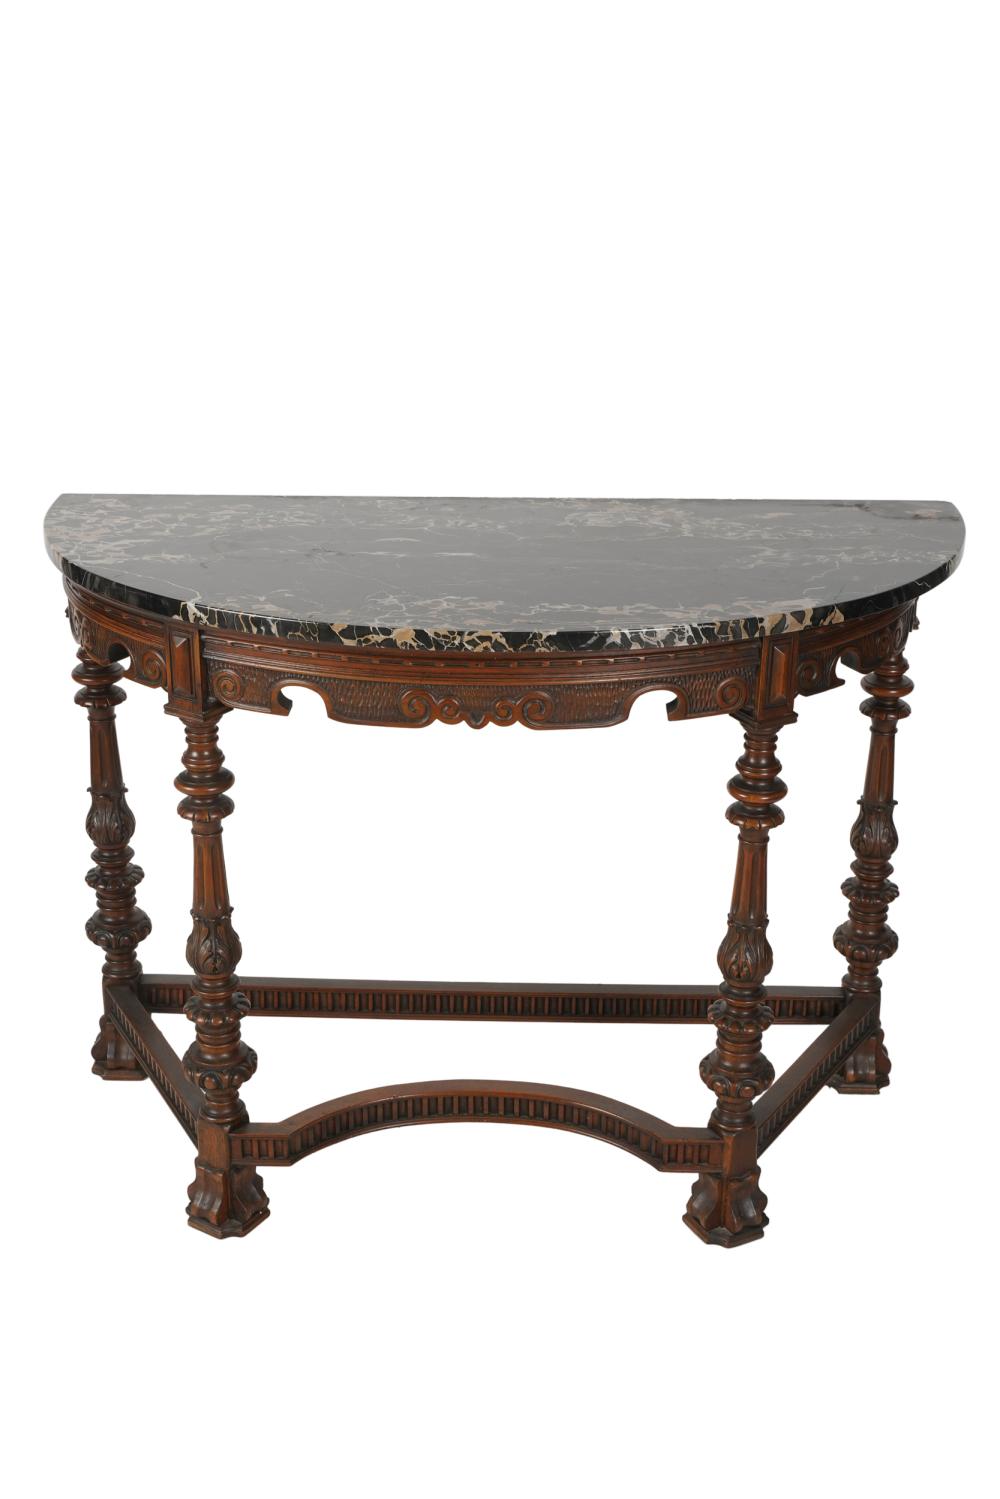 MARBLE-TOP CARVED WOOD DEMILUNE